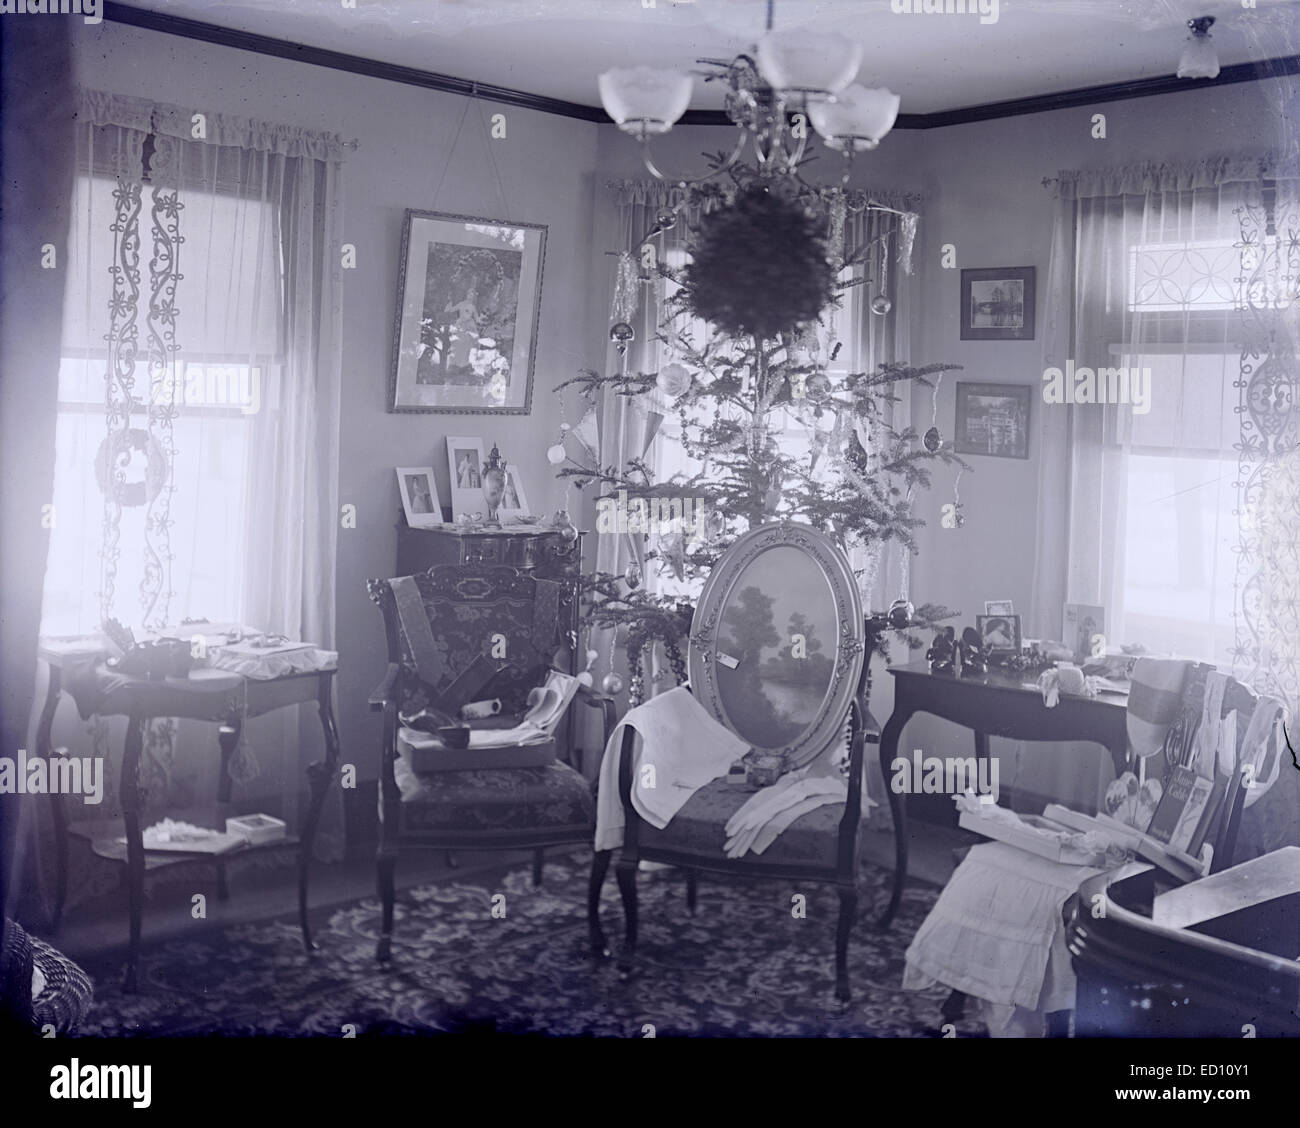 Antique, circa 1906 image, Christmas tree with opened presents on display, Boston, Massachusetts, USA. The book 'Jane Cable' by George Barr McCutcheon, the fifth best-selling novel in the United States in 1906, is visible on the chair. Stock Photo